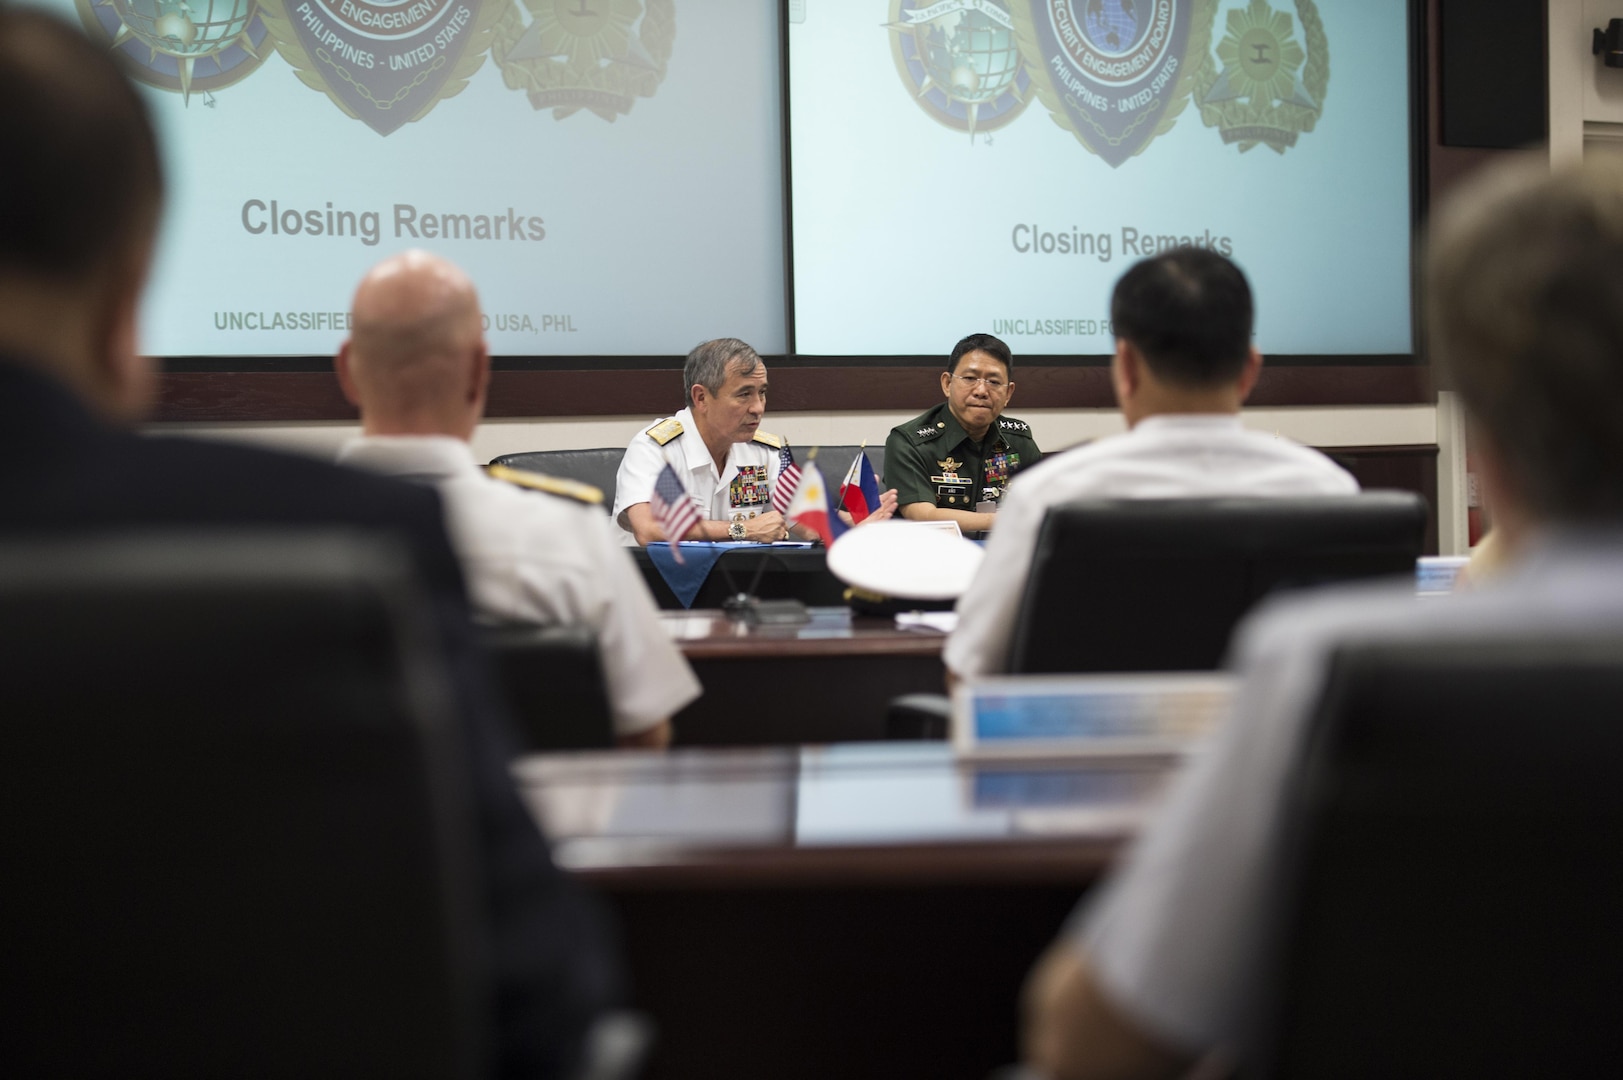 CAMP H.M. SMITH, Hawaii (Sept. 28, 2018) — Adm. Harry Harris, Commander of U.S. Pacific Command (PACOM), and Gen. Eduardo Año, Chief of Staff for the Armed Forces of the Philippines, deliver their closing remarks during a conference for the Mutual Defense Board (MDB) and Security Engagement Board (SEB). During Año’s two-day visit to PACOM, he and Harris discussed changes to the MDB and SEB. The MDB provides direct liaison and consultation on military matters of mutual concern to develop and improve both countries’ common defense. The SEB provides the framework and mechanism for continuing liaison and consultation on non-traditional threats to security such as terrorism, transnational crimes, maritime security, and natural and man-made disasters. (U.S. Navy photo by Mass Communication Specialist 2nd Class James Mullen/Released)